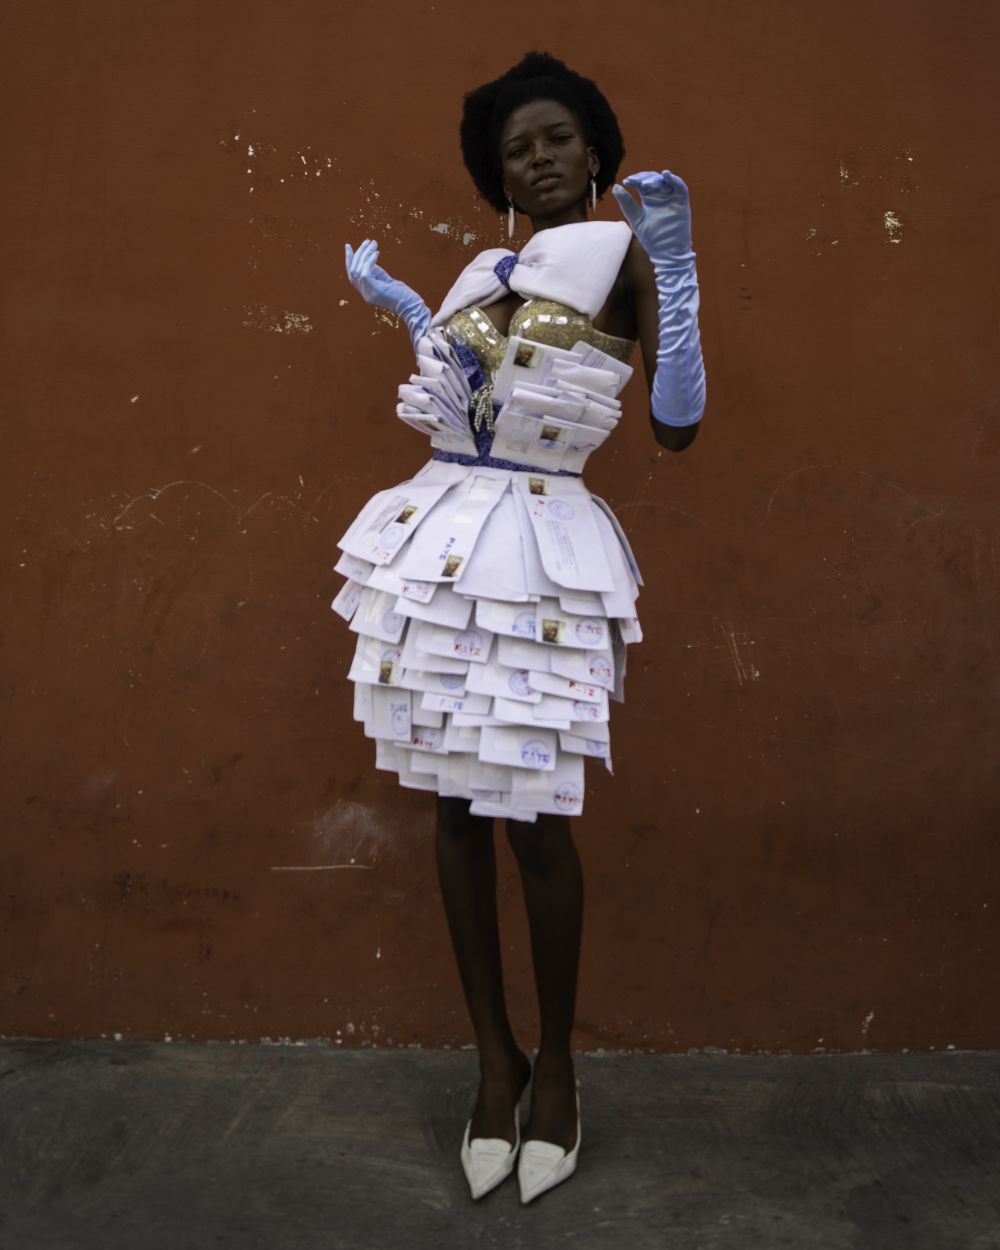 Outfit designed by BA (Hons) Creative Direction for Fashion student, Delali Ayivi, made from letters.